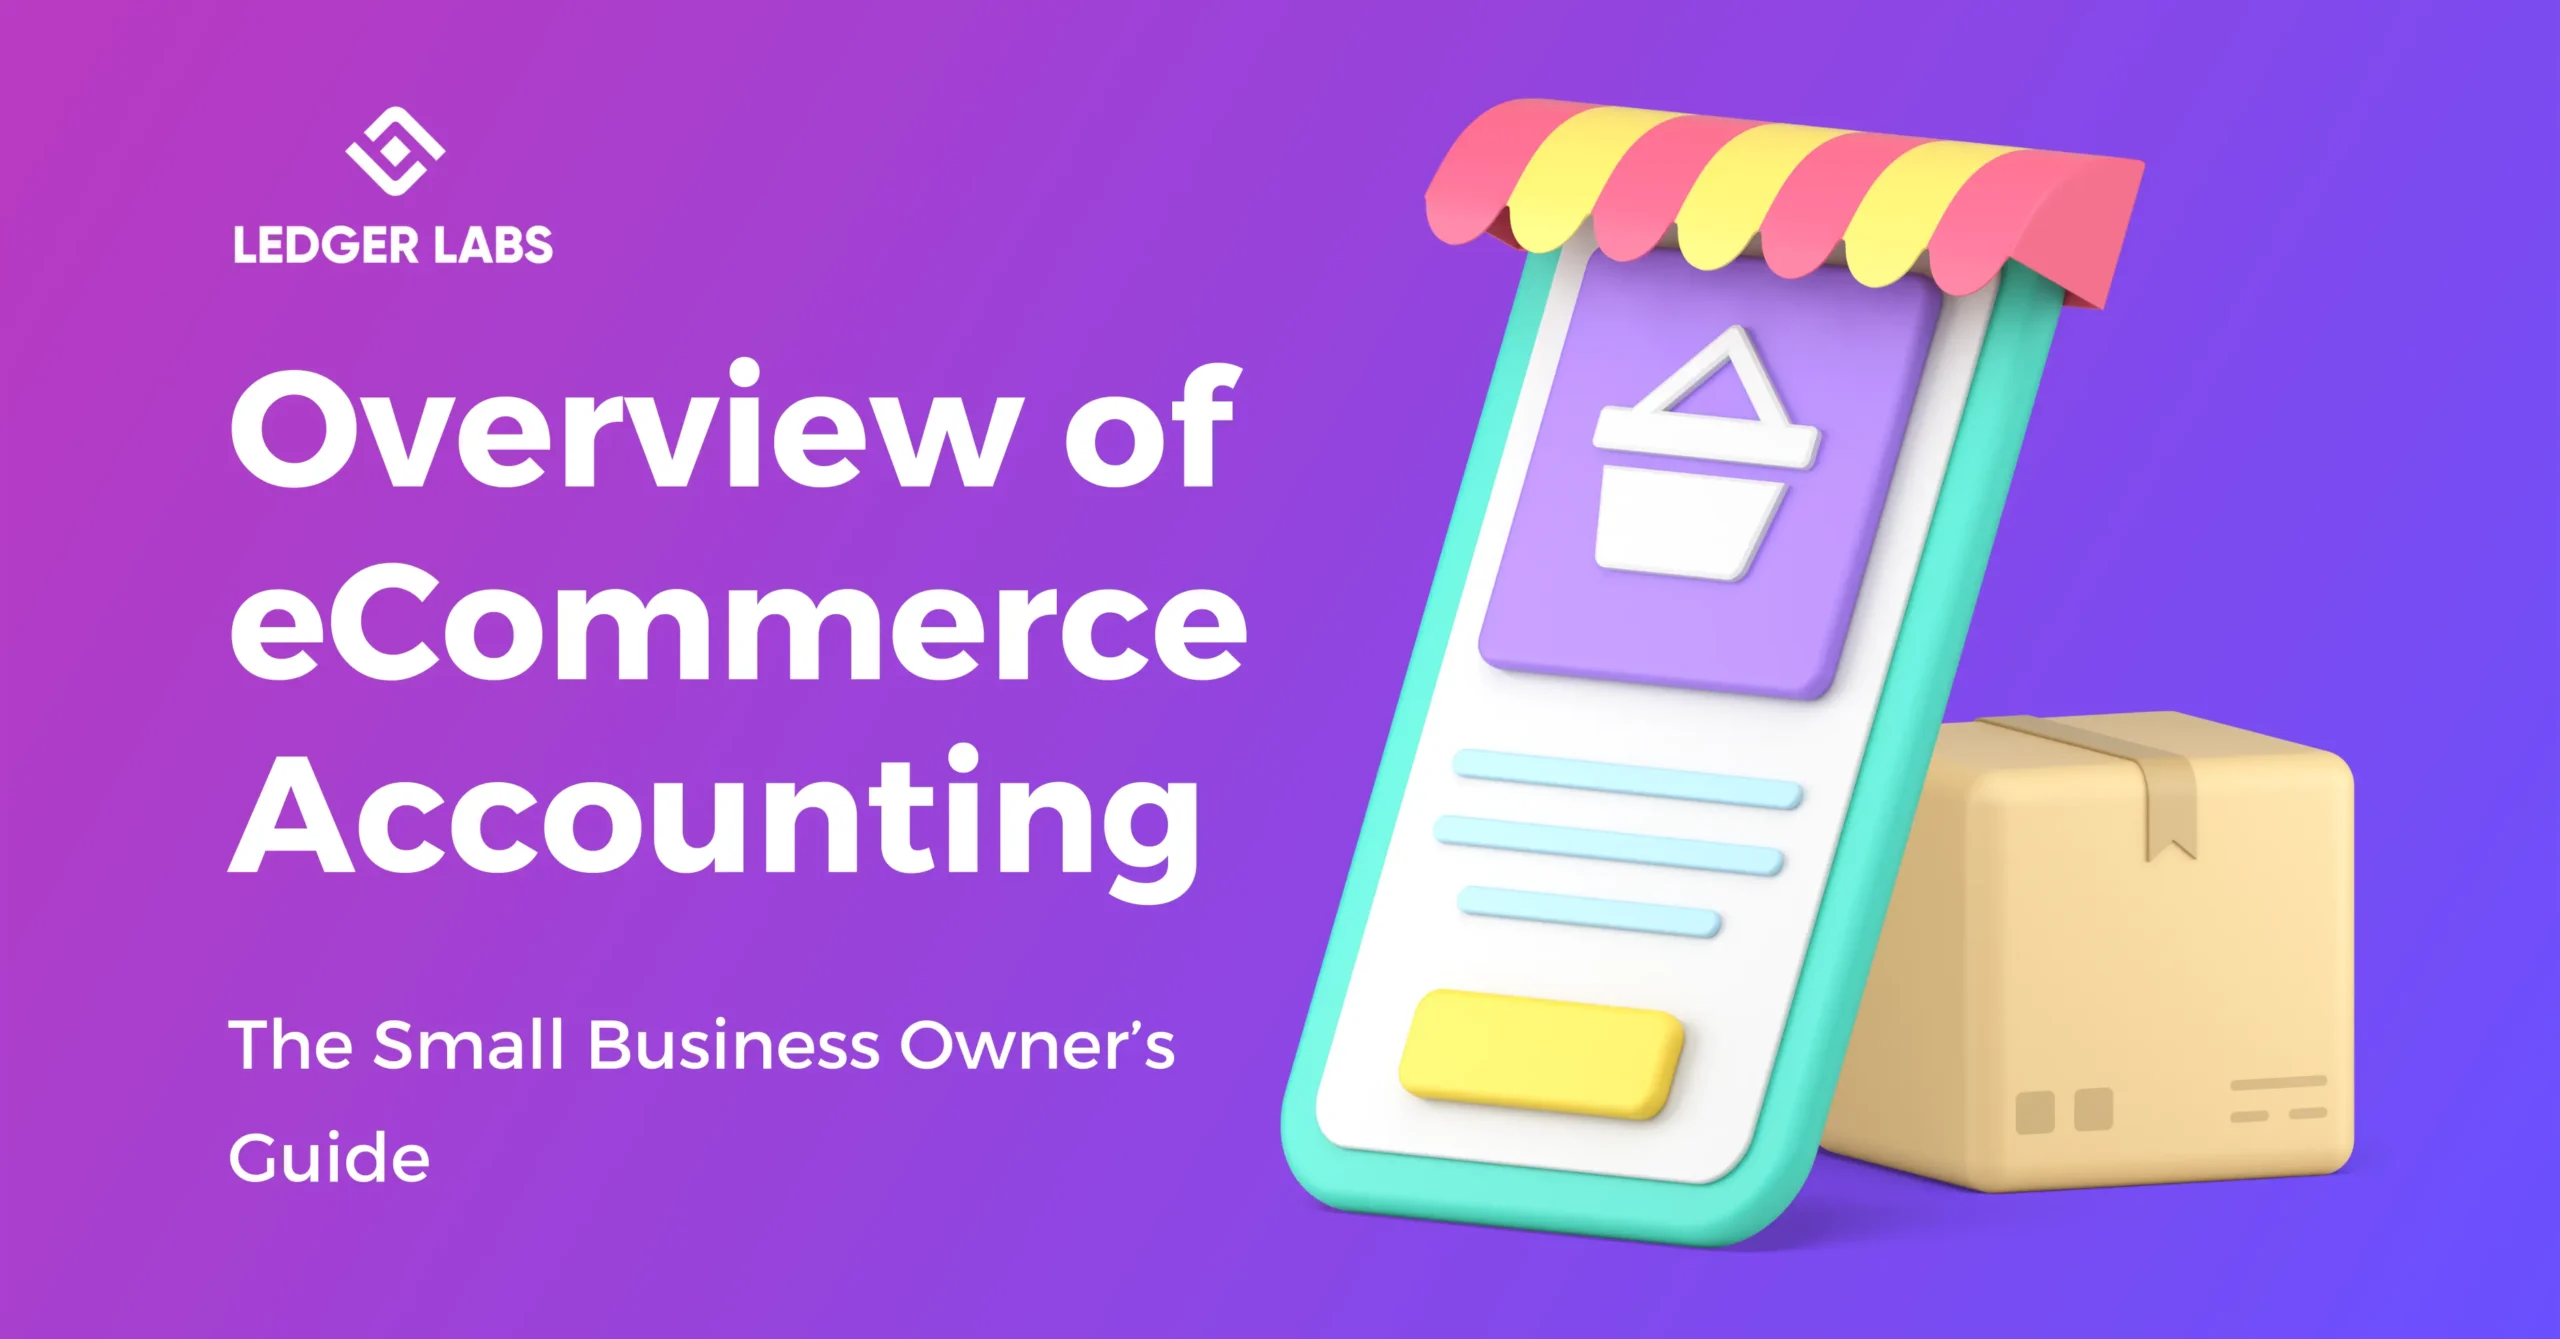 Overview of eCommerce Accounting